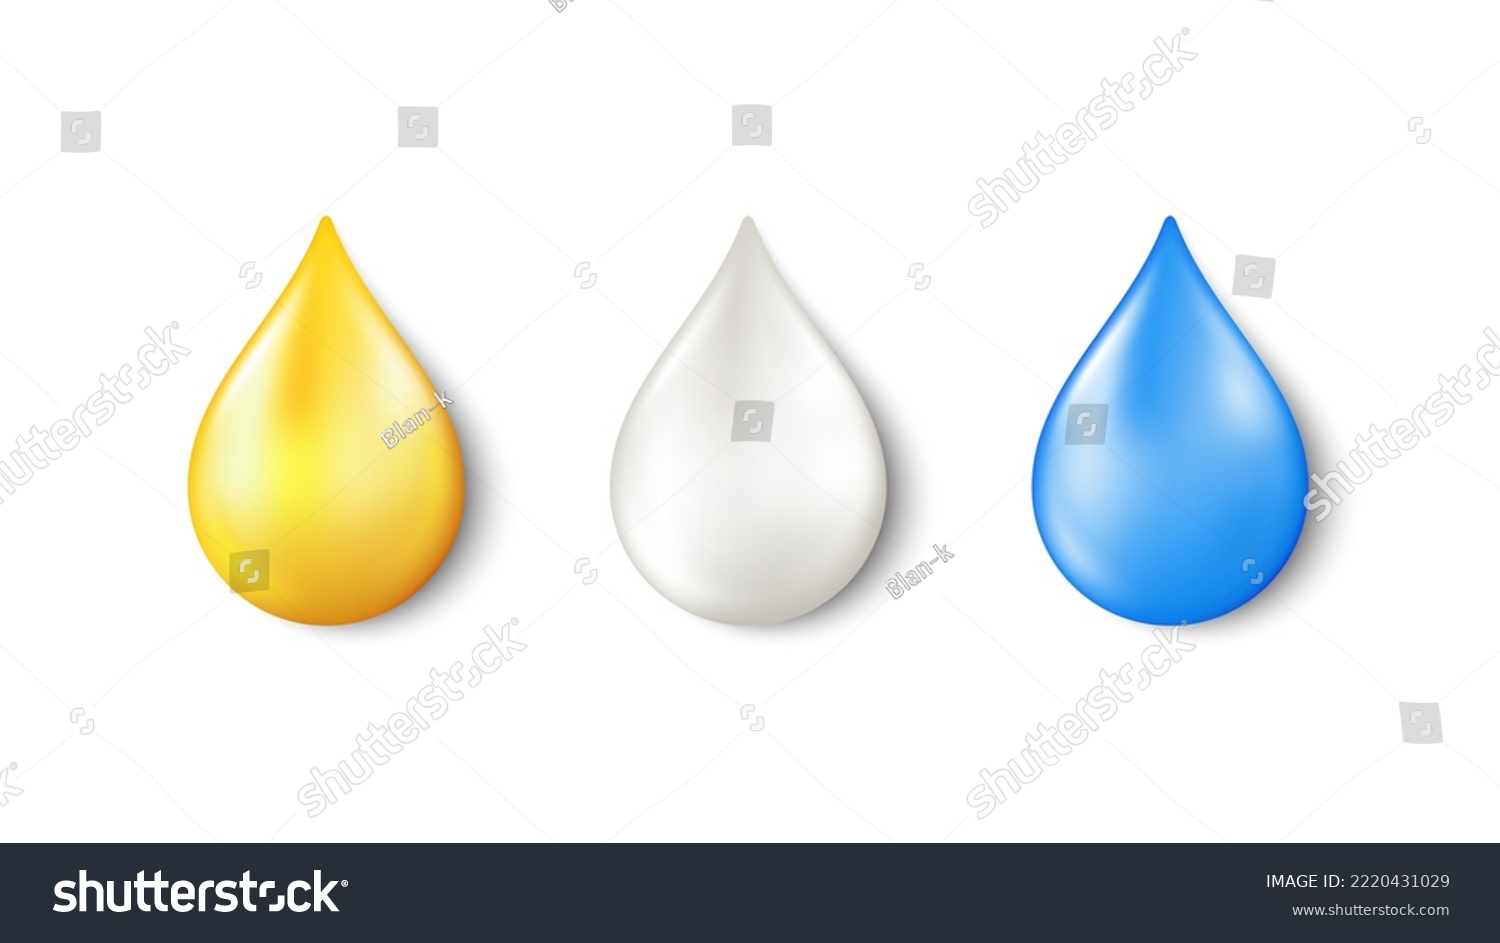 SVG of 3d drop of oil, water and cream on white background. Golden drop honey, liquid omega vitamin and milk droplet. Liquid oil fuel, serum blob and white cream. 3d blue water drop. Vector svg